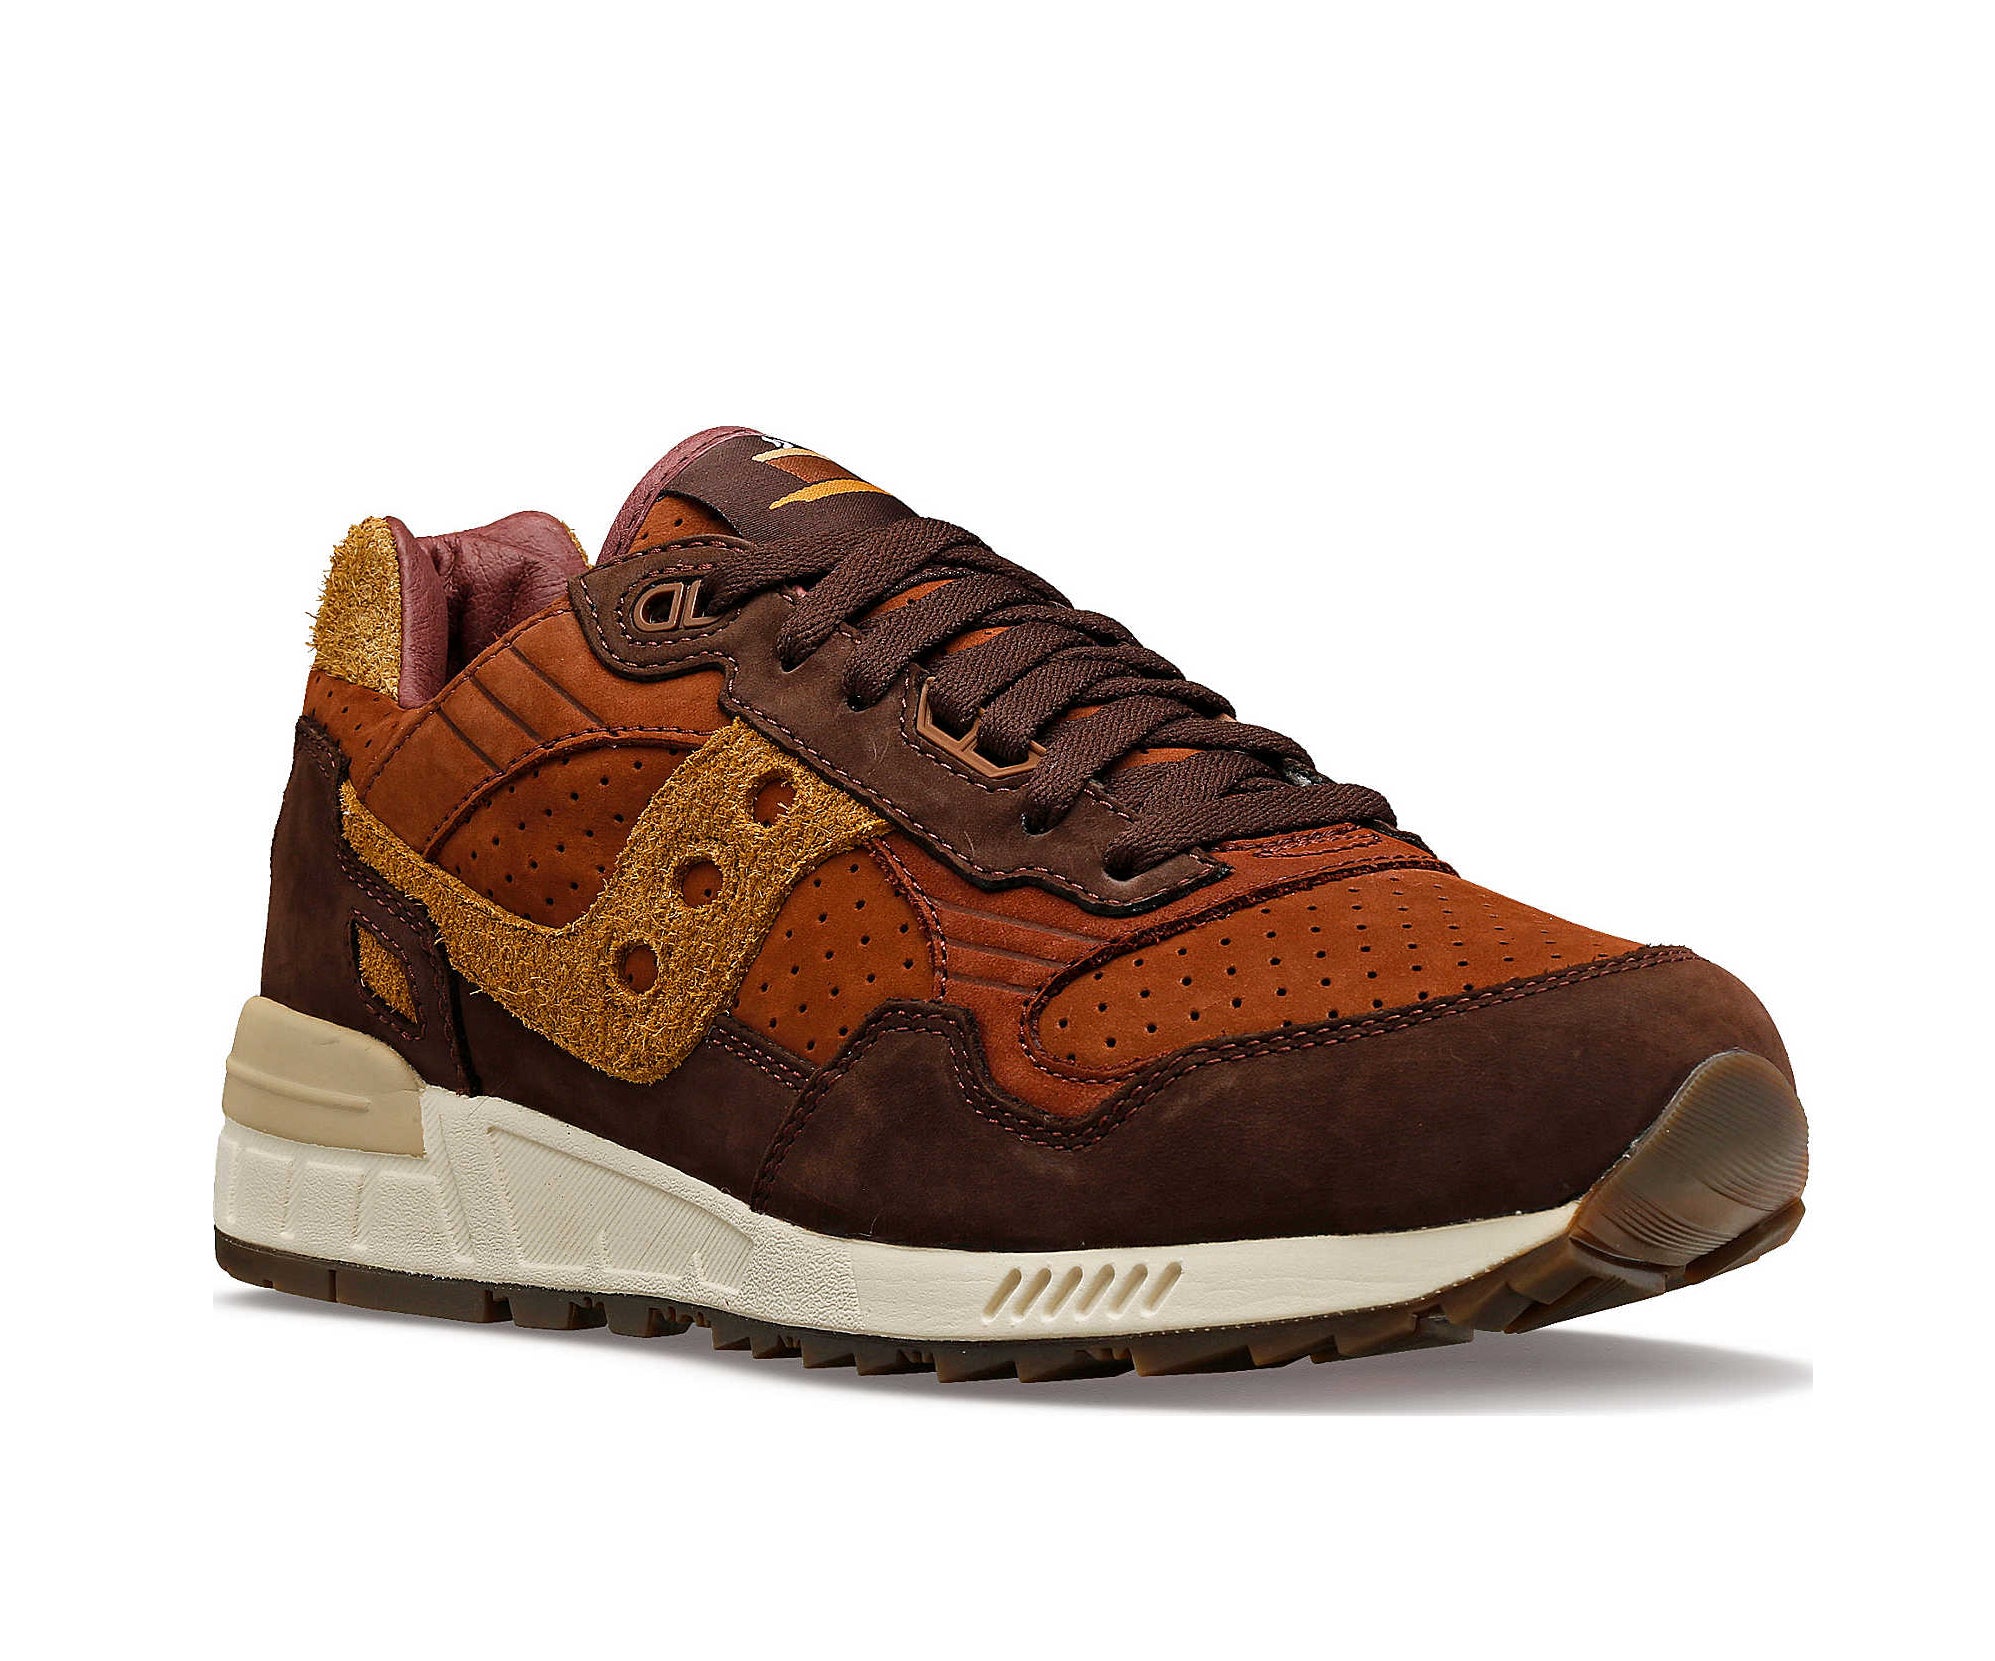 A suede low-cut Saucony sneaker in various shades of rich brown.